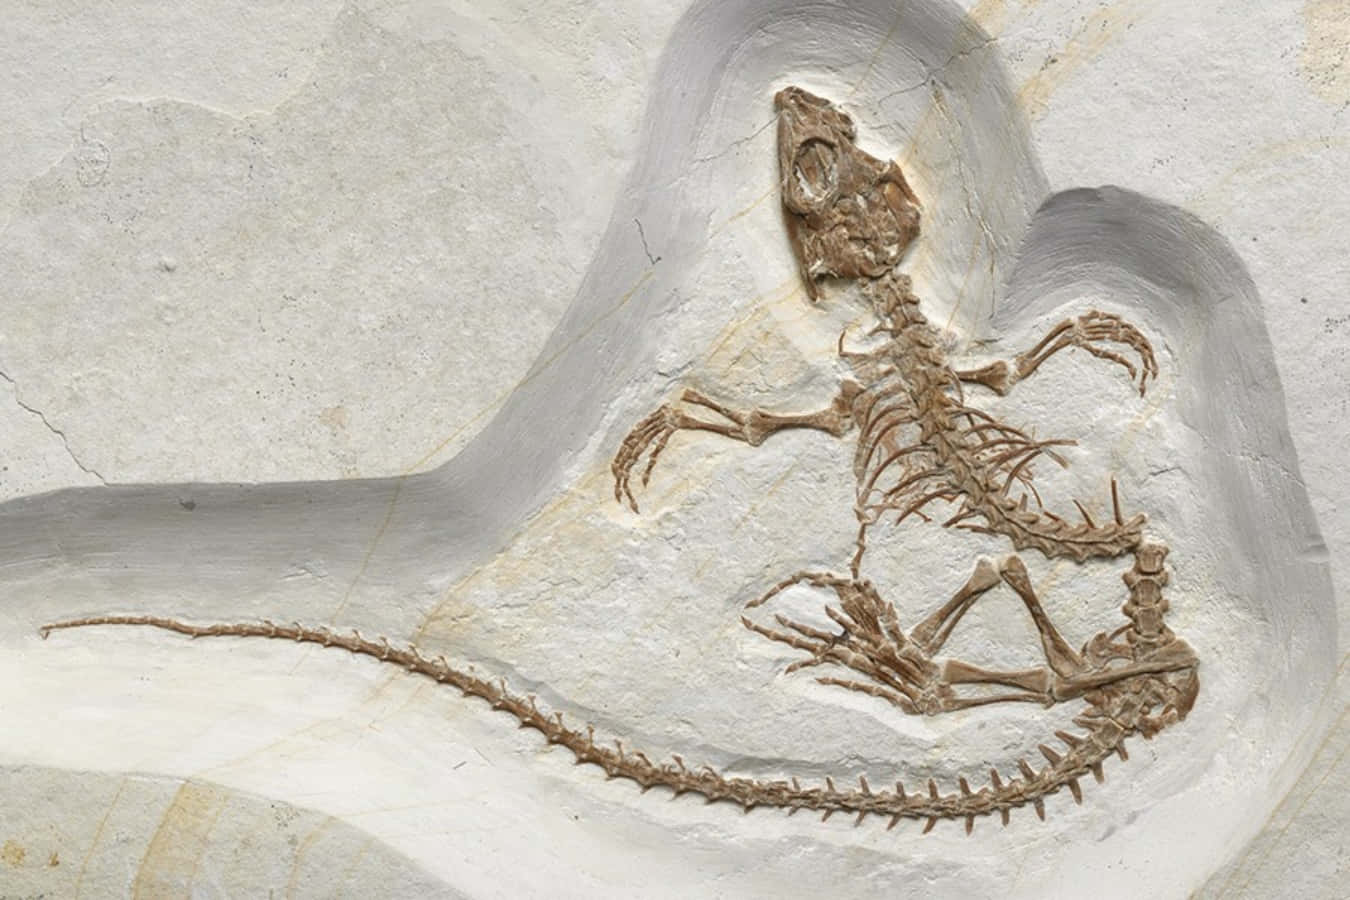 A Dinosaur Skeleton Is Shown On A White Background